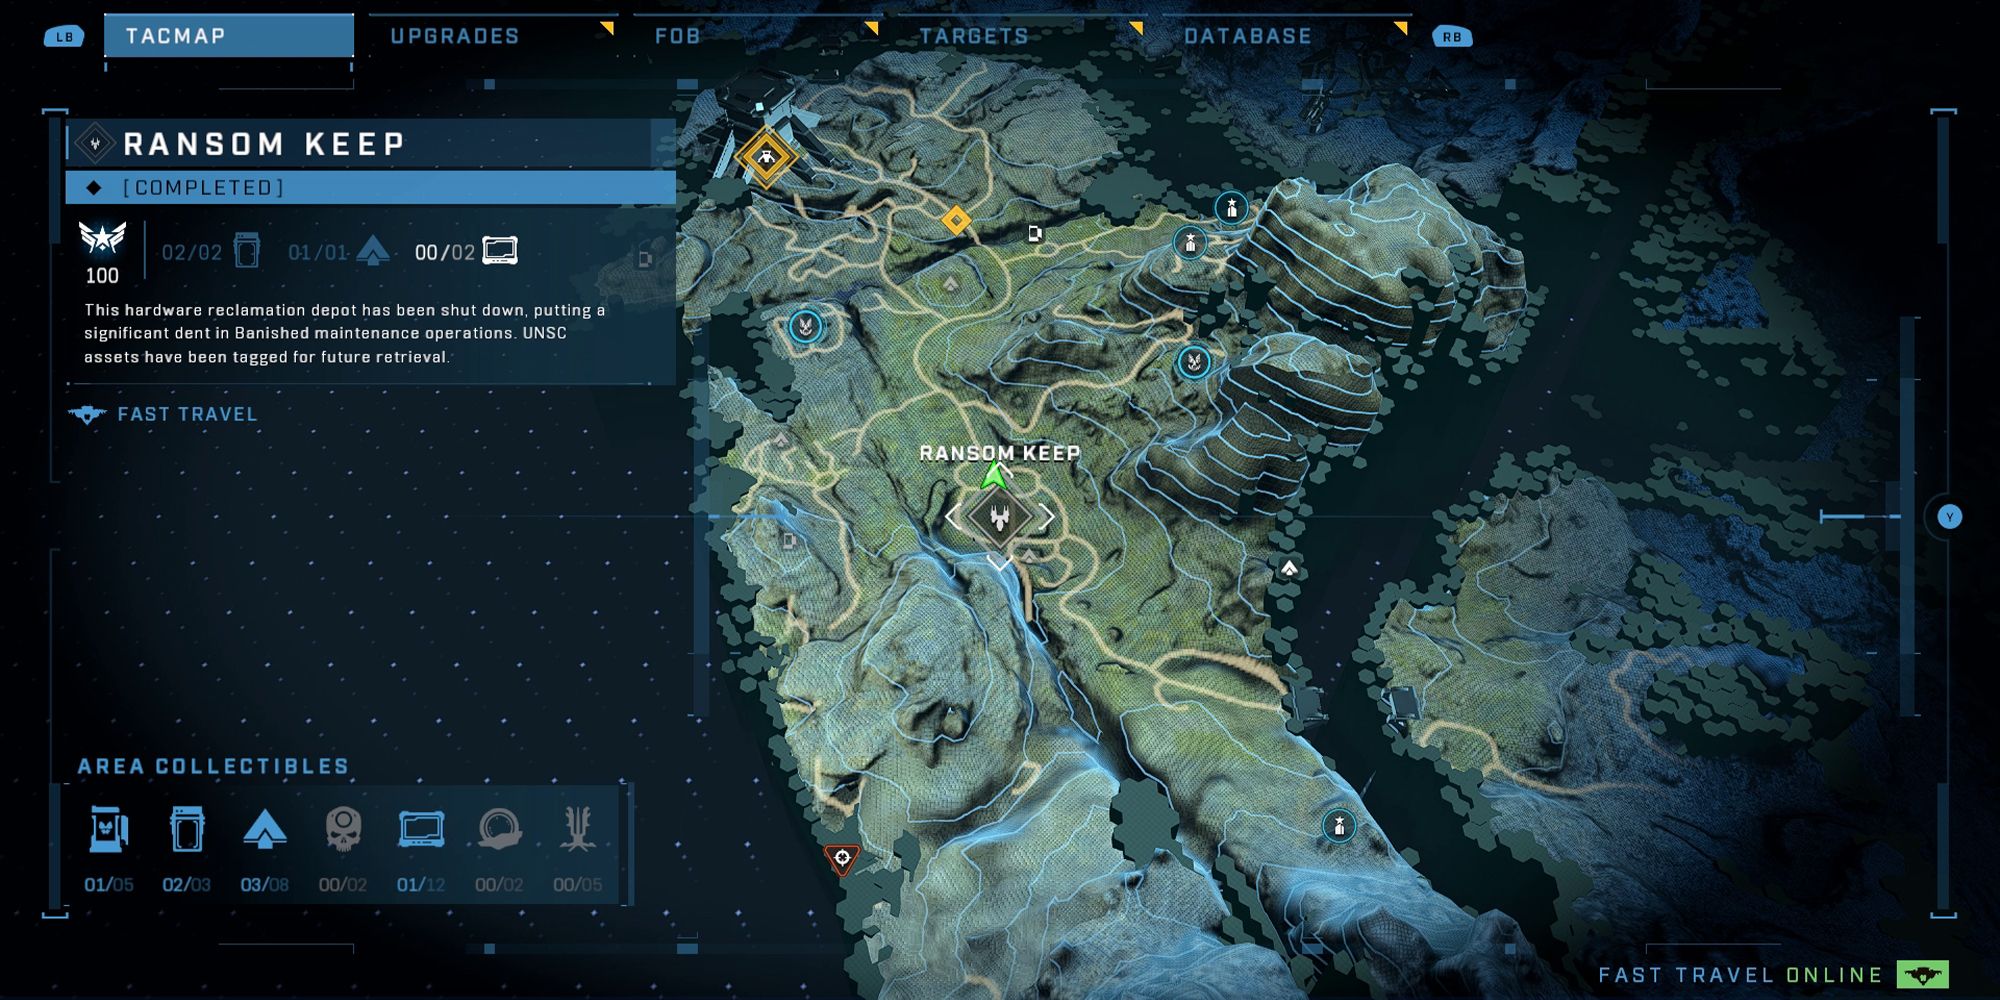 Halo Infinite Every Spartan Core Location In The First Region